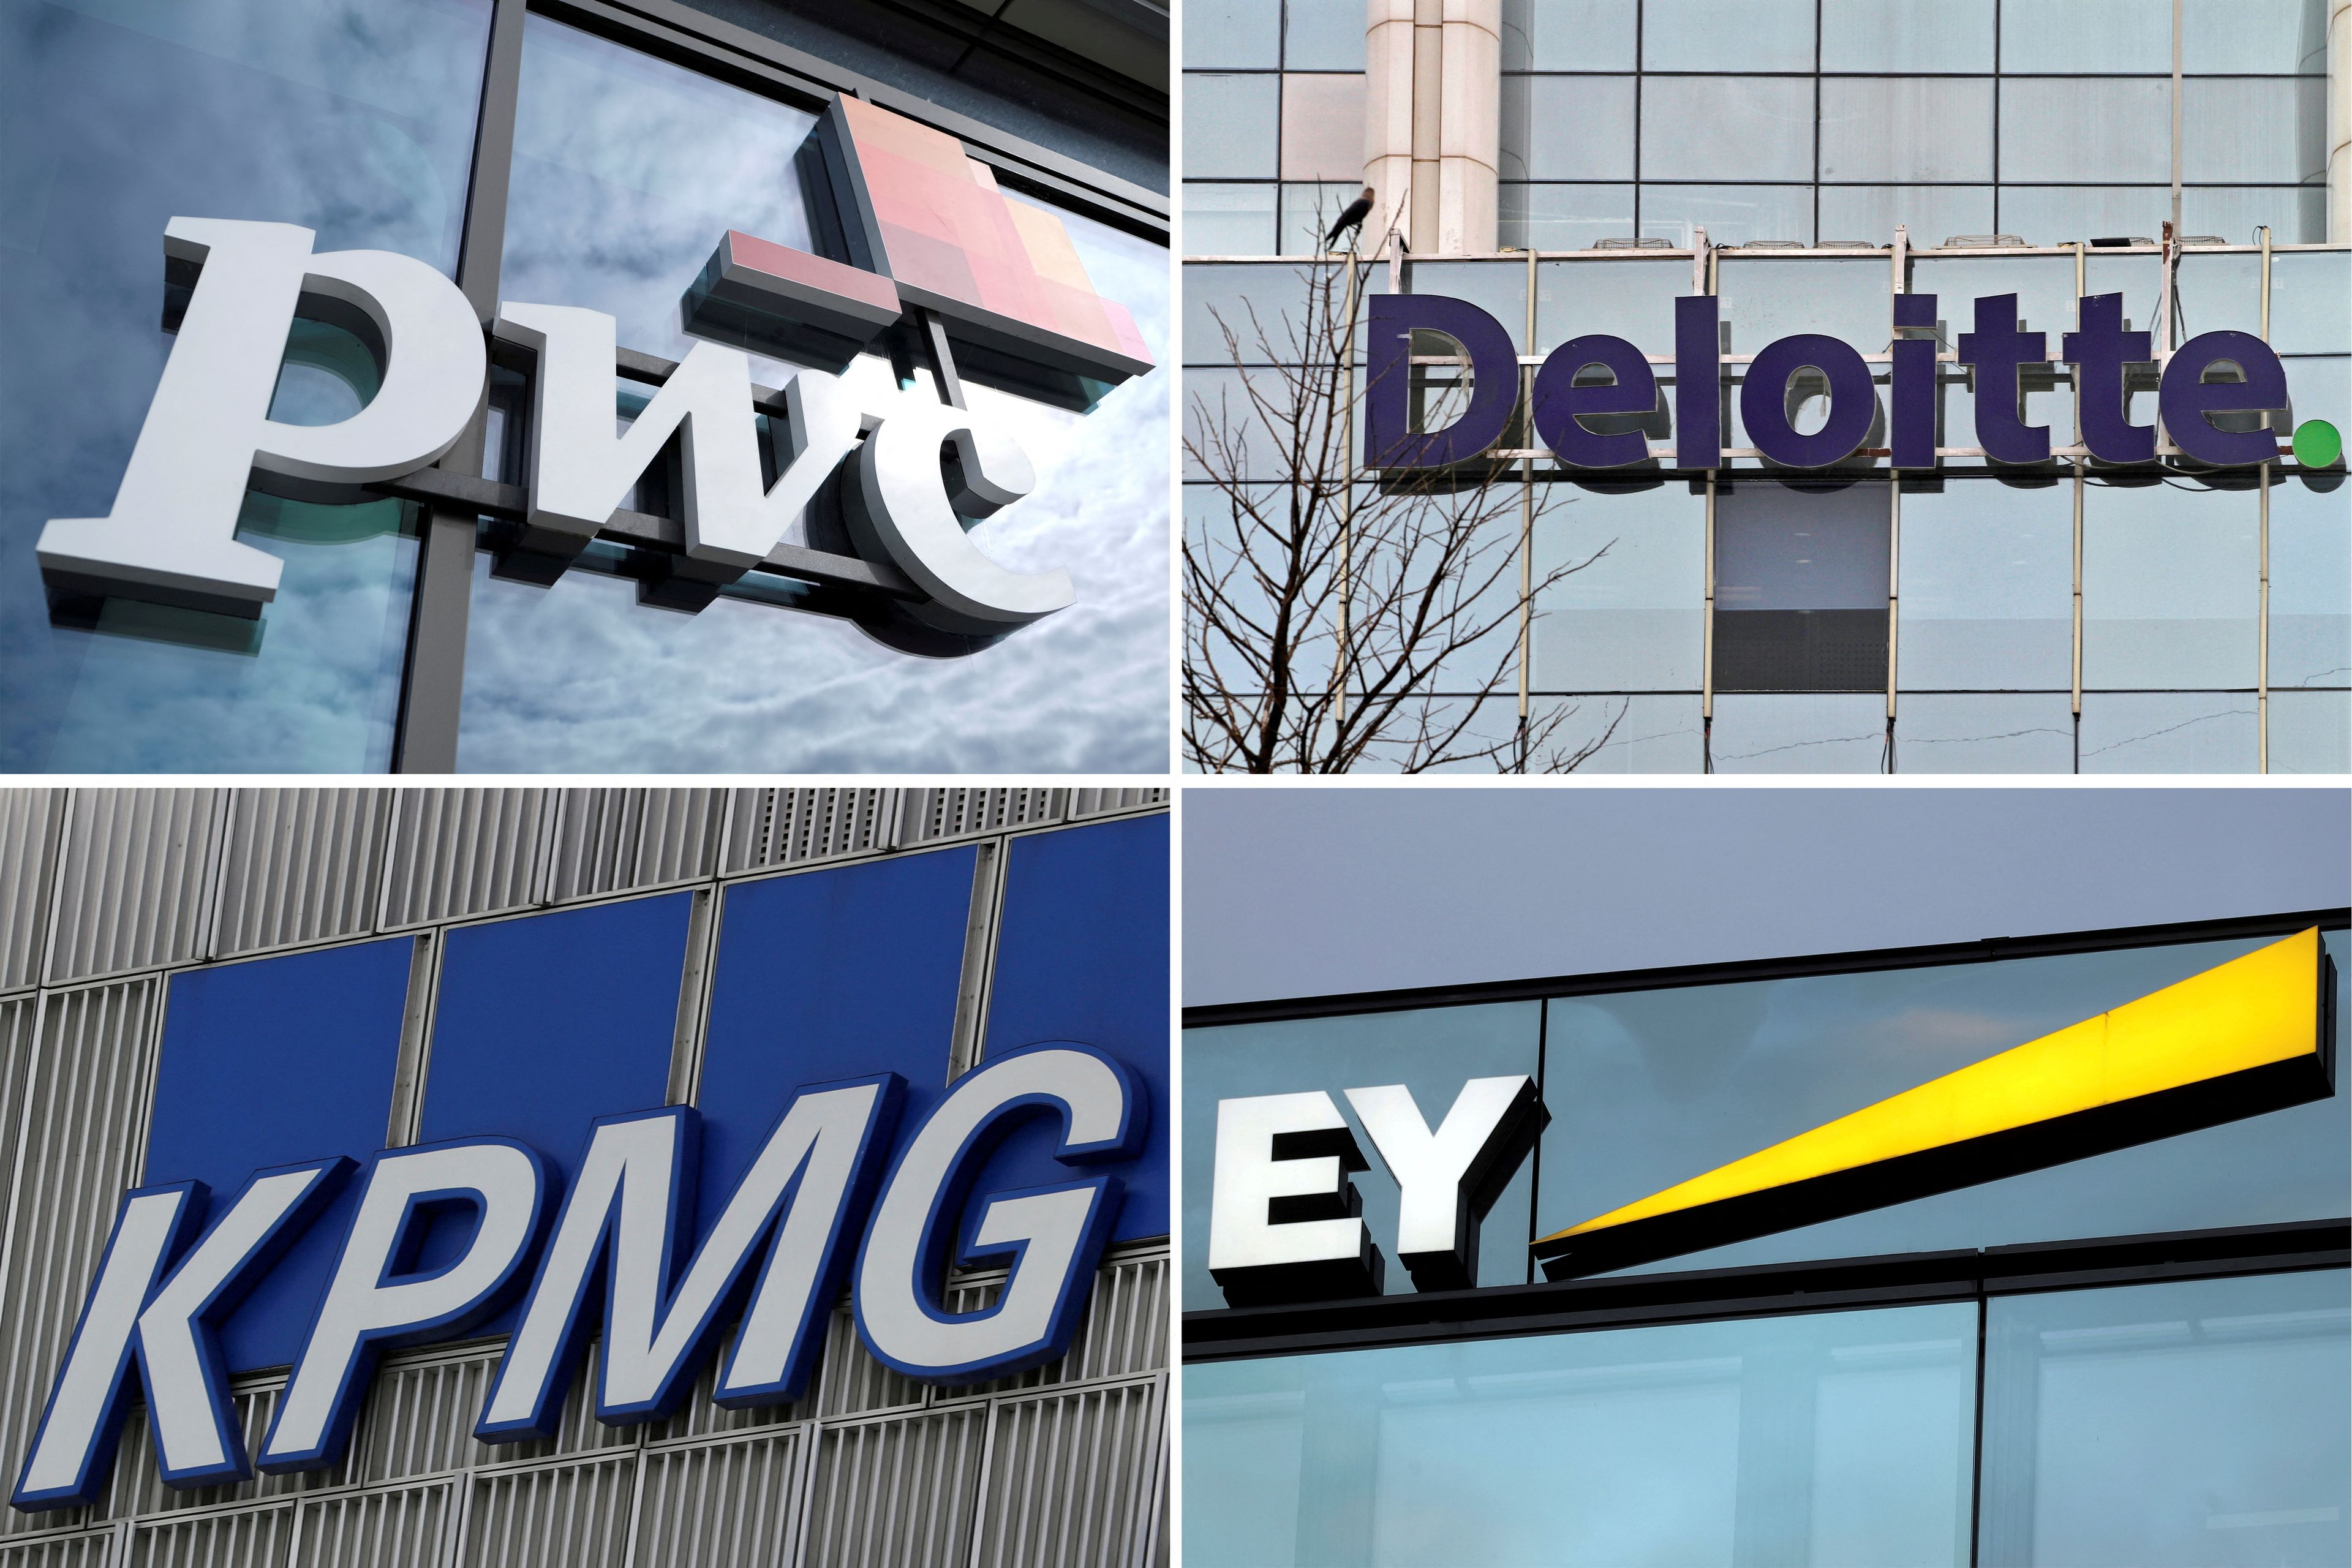 Price Waterhouse Coopers, Deloitte, KPMG y Ernst & Young